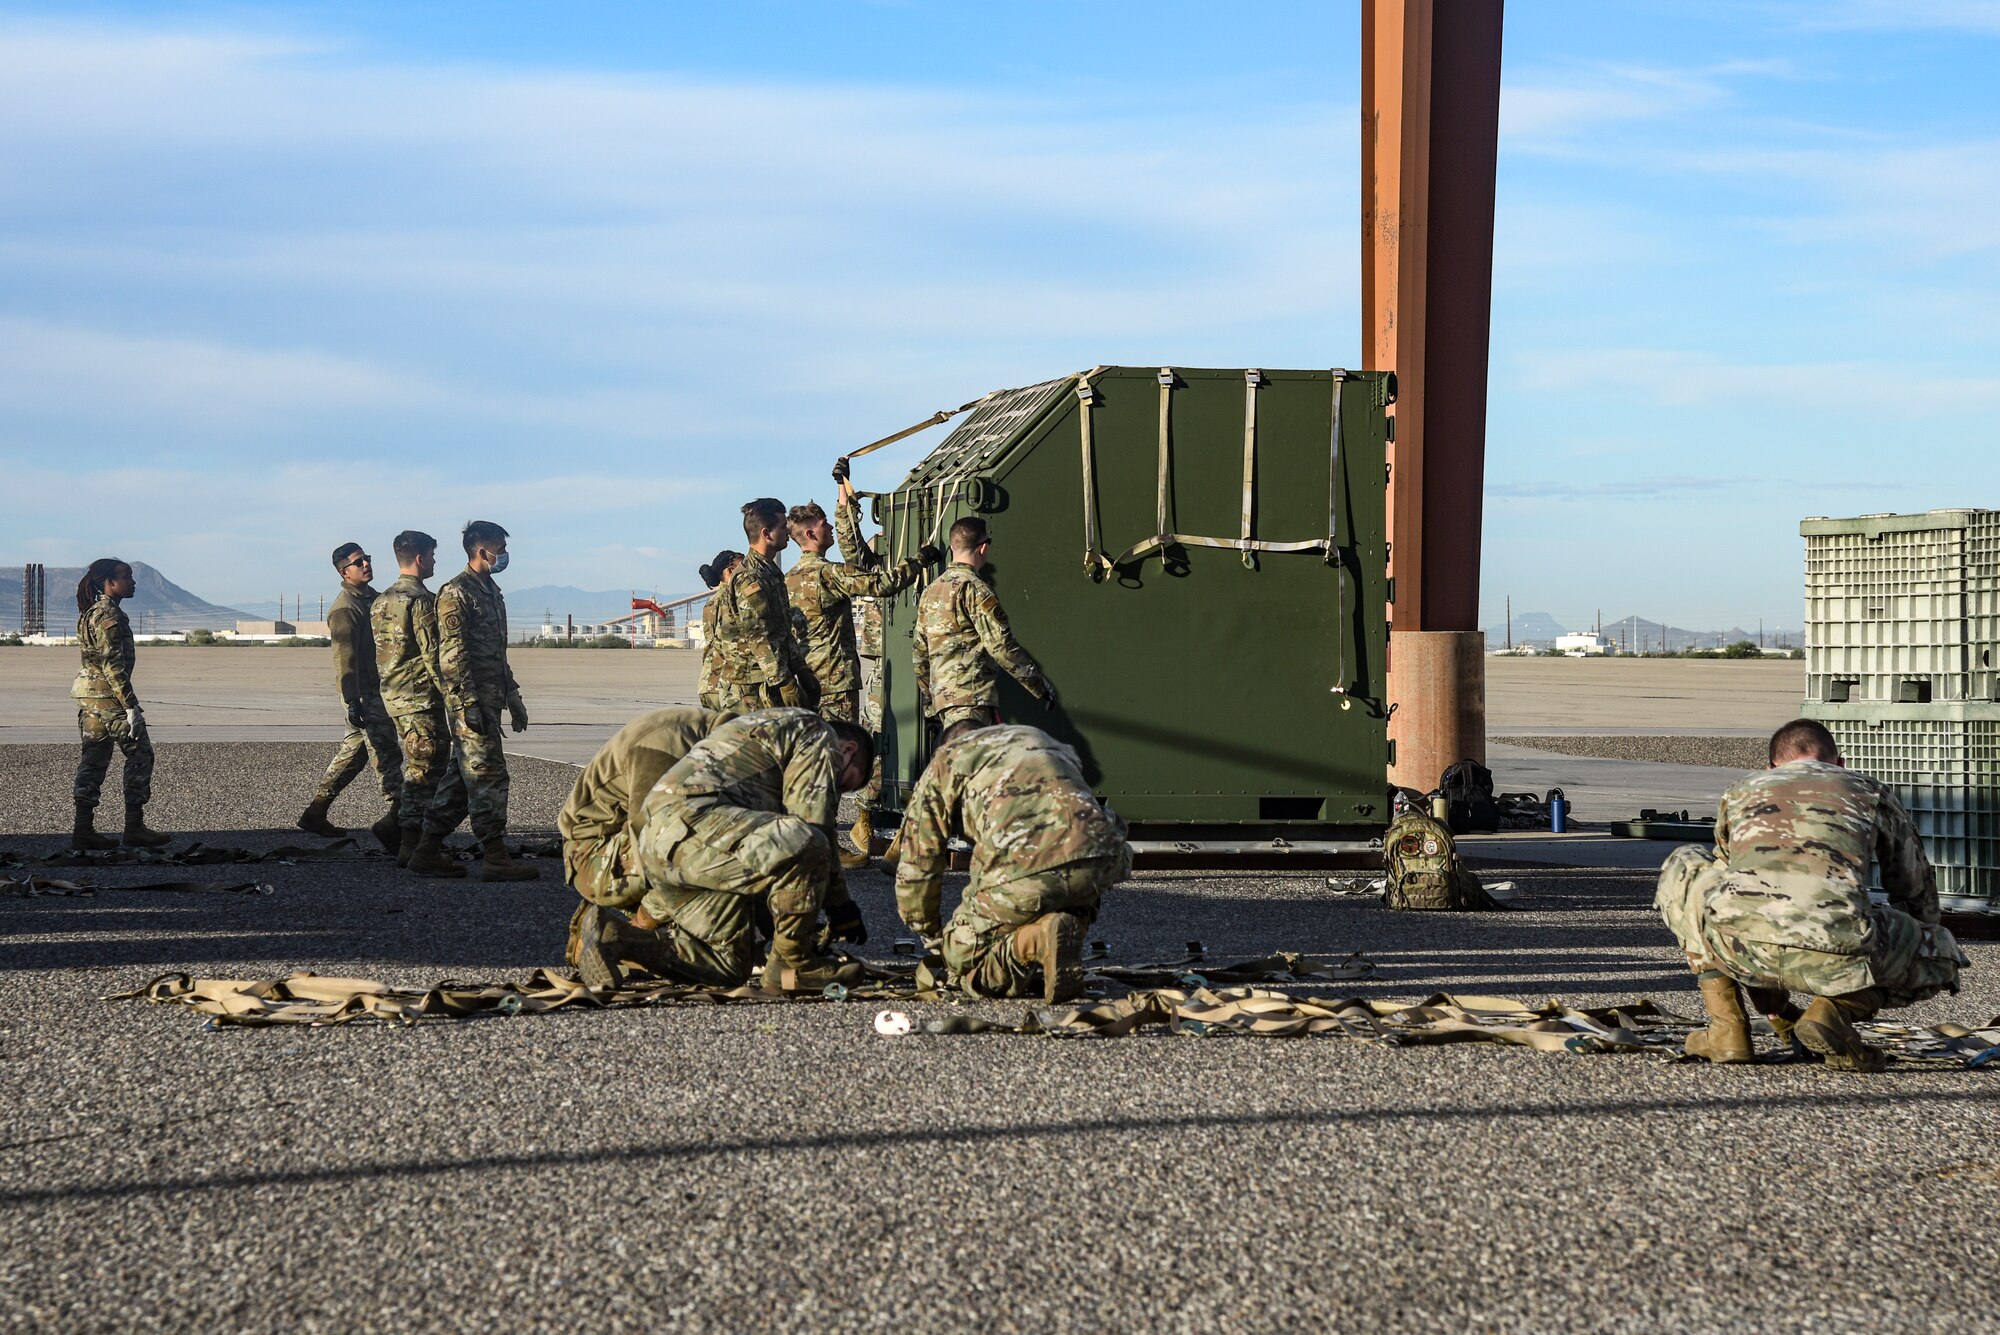 Pictured above is a large group of Airmen preparing to wrap a container in a cargo net.